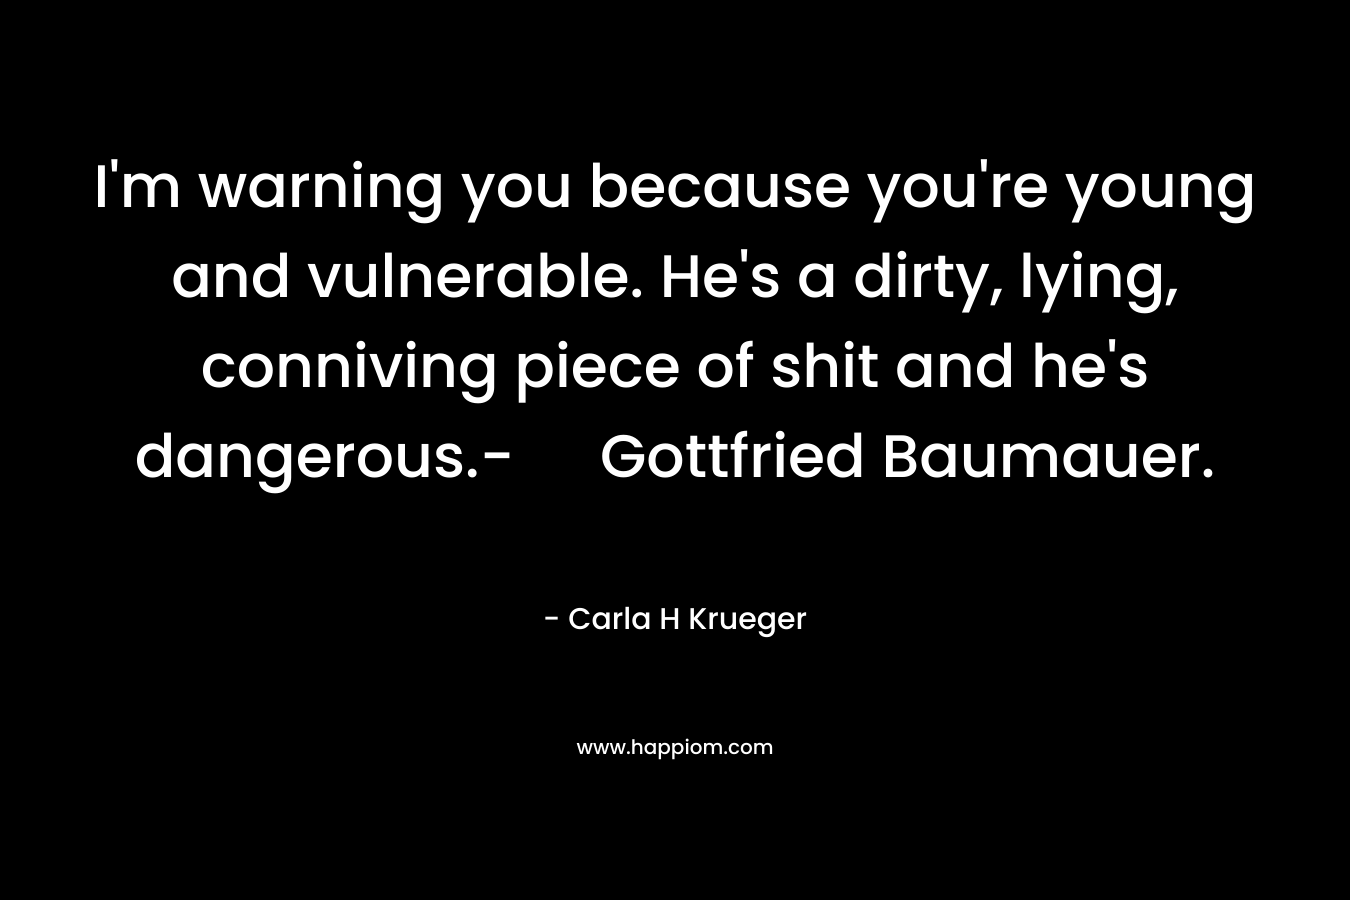 I’m warning you because you’re young and vulnerable. He’s a dirty, lying, conniving piece of shit and he’s dangerous.- Gottfried Baumauer. – Carla H Krueger